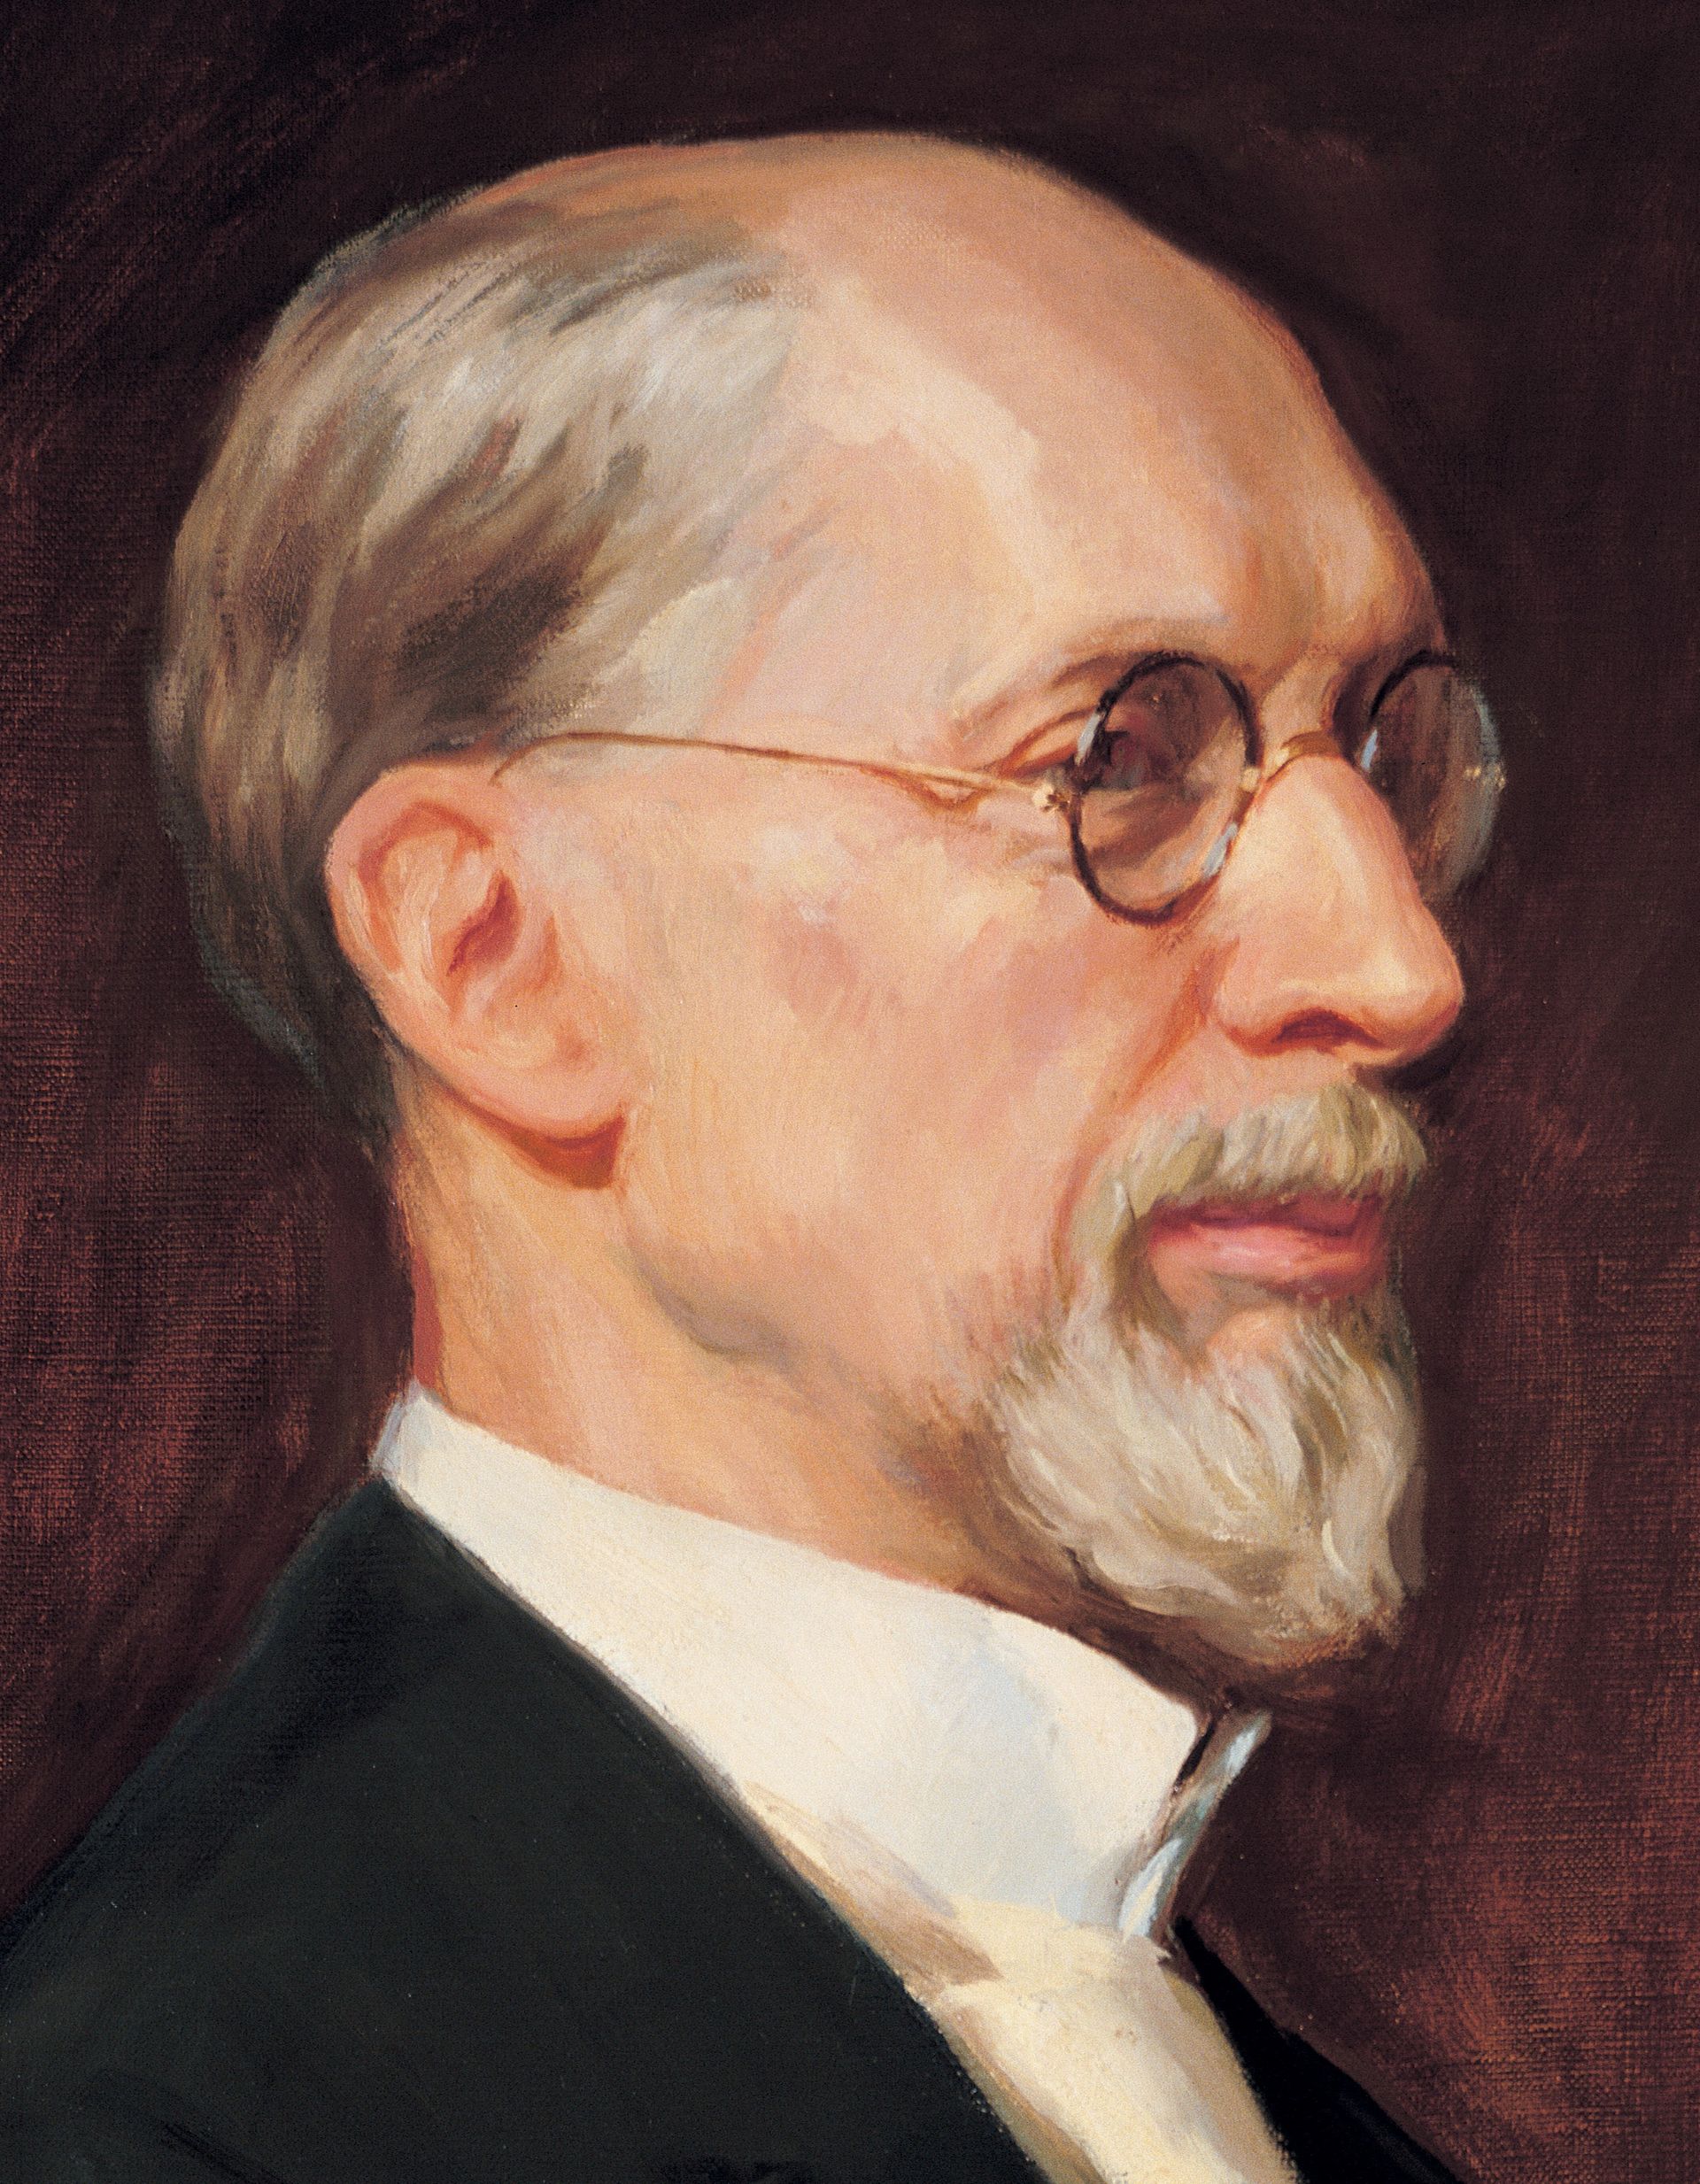 George Albert Smith, by Lee Greene Richards; GAK 513; Our Heritage, 110–14. President George Albert Smith was the eighth President of the Church from 1945 to 1951.